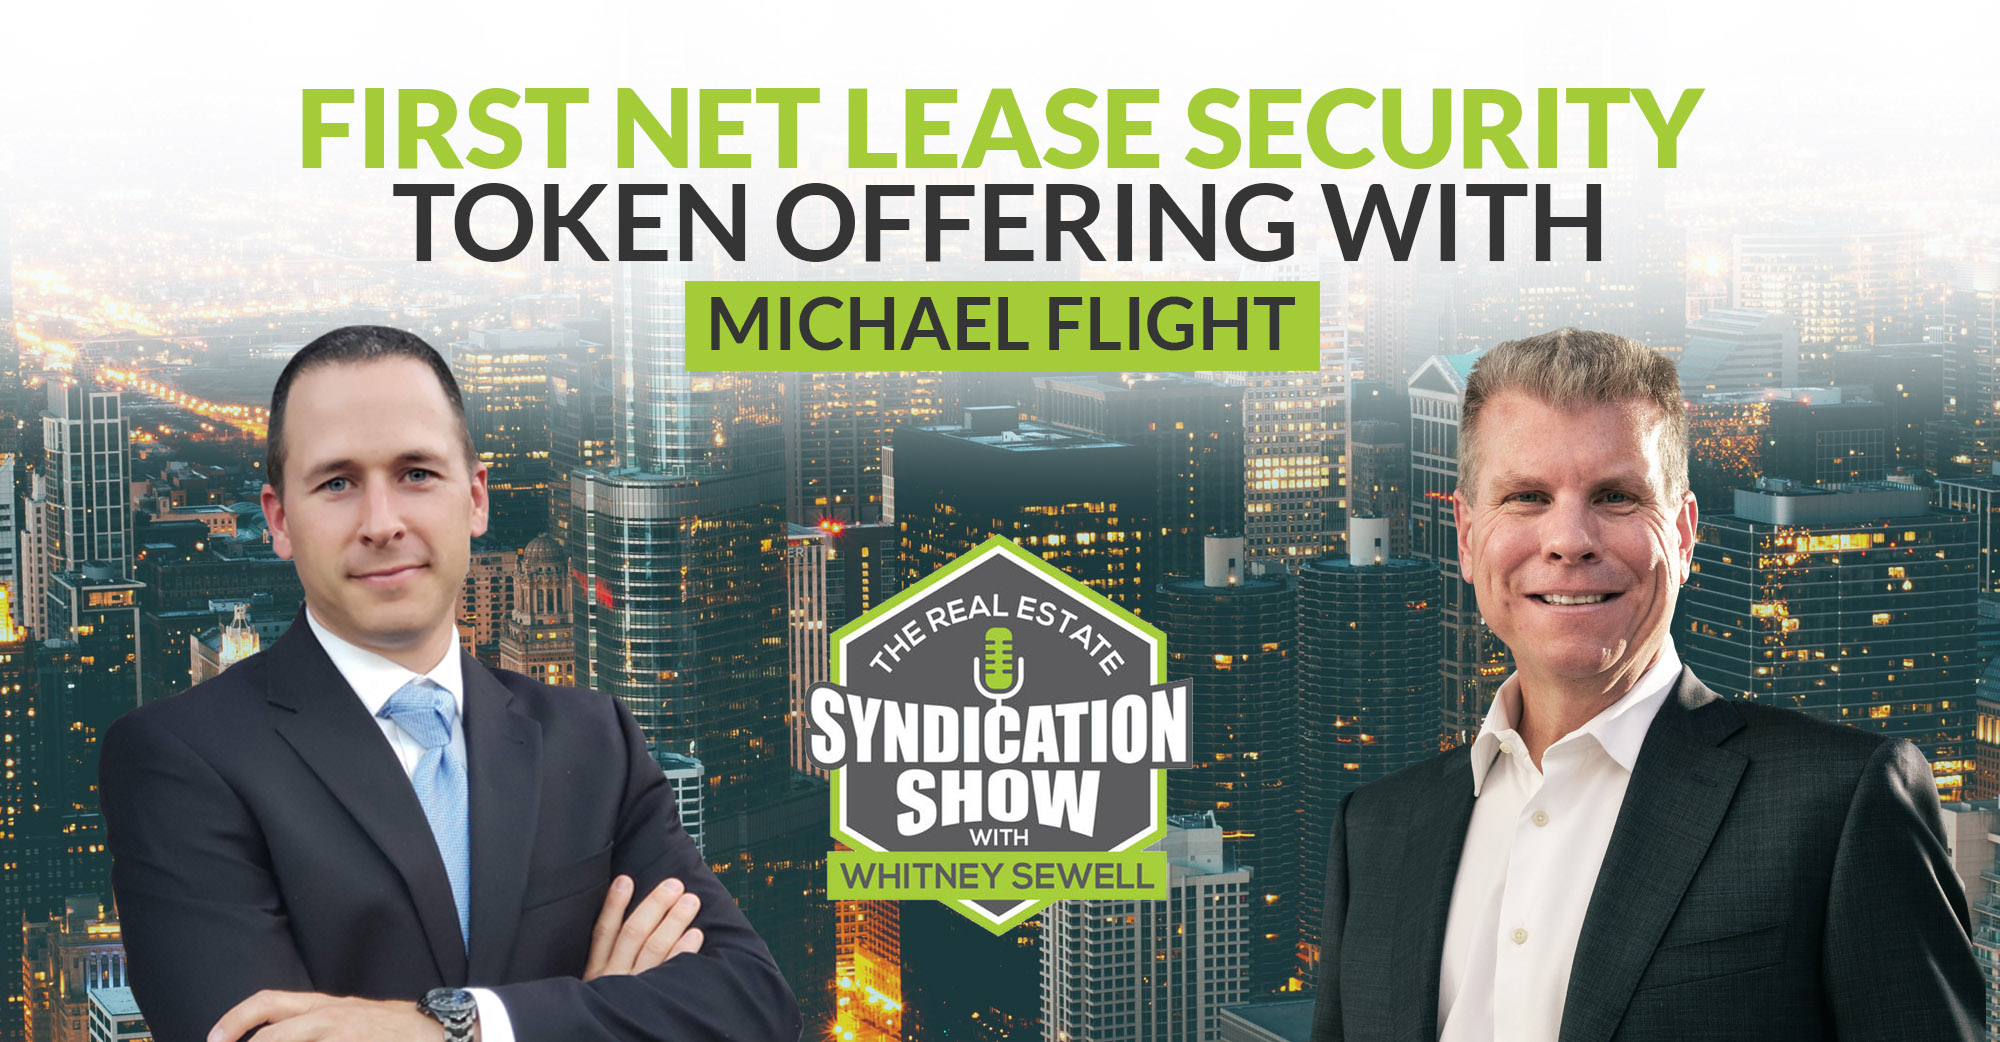 First Net Lease Security Token Offering with Michael Flight